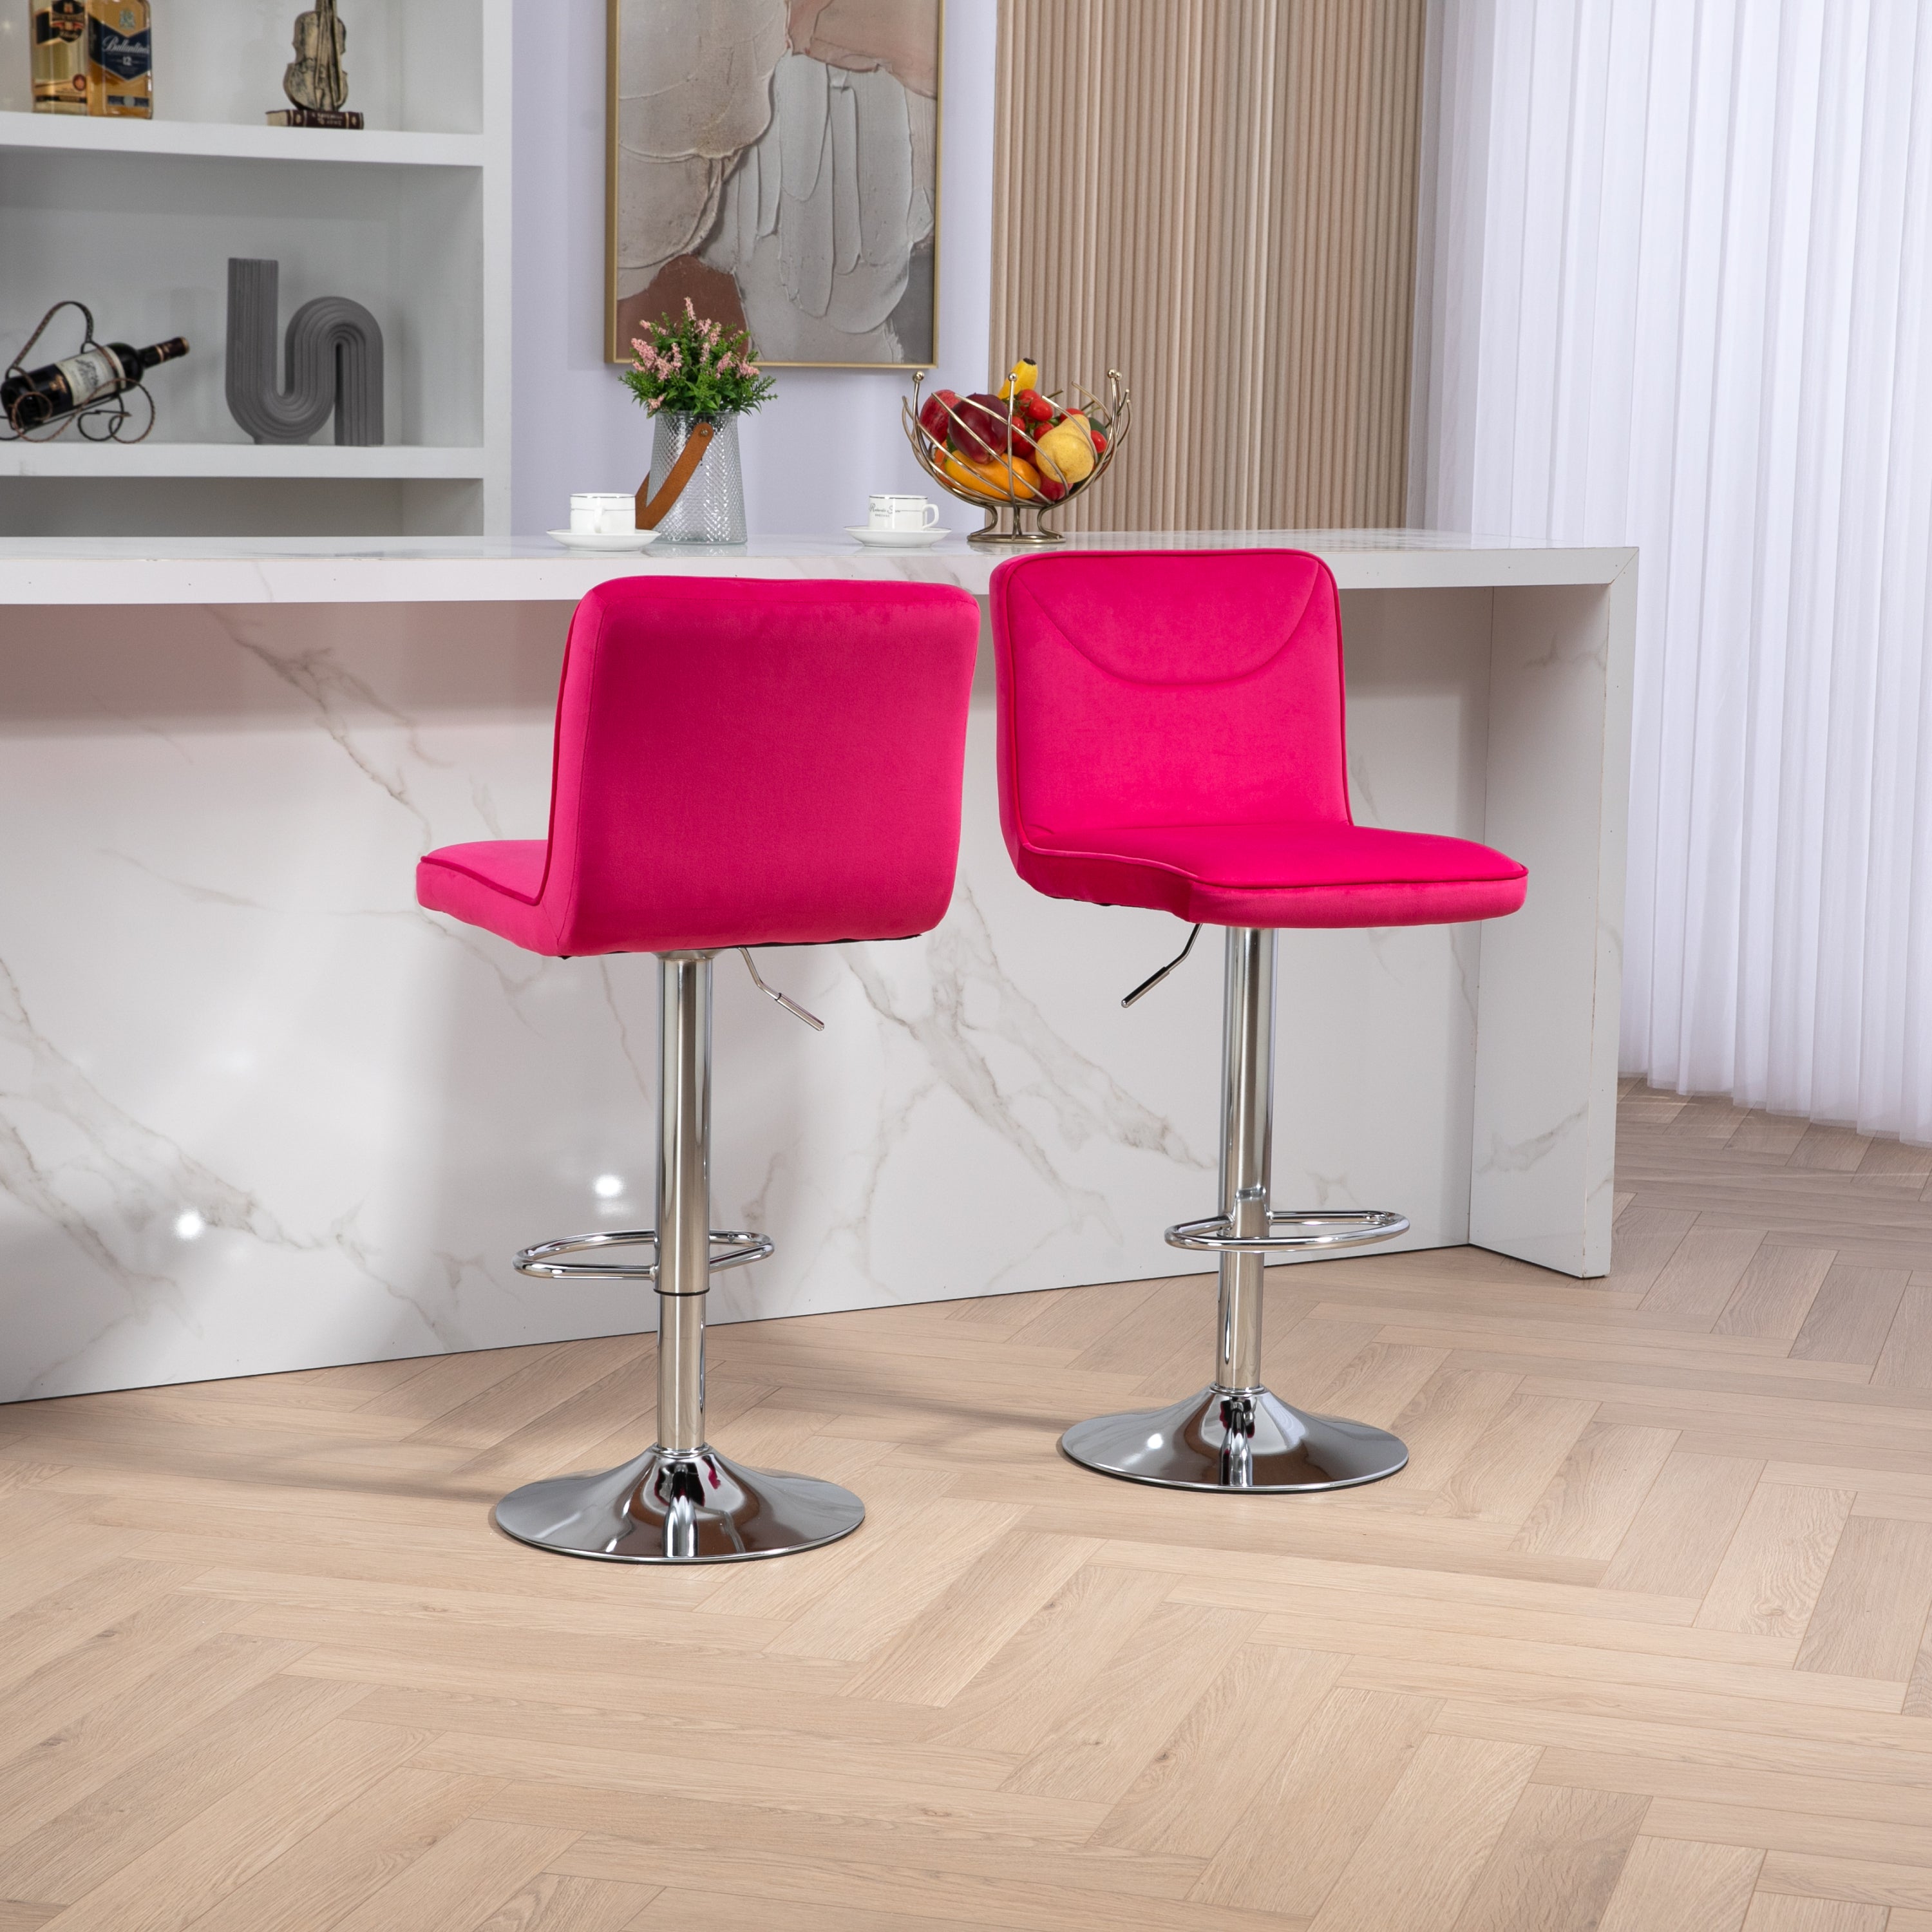 🆓🚛 Modern Swivel Bar stools Set of 2, Adjustable Counter Height Bar Chairs, with Backrest Footrest, Chrome Base, Rose Red